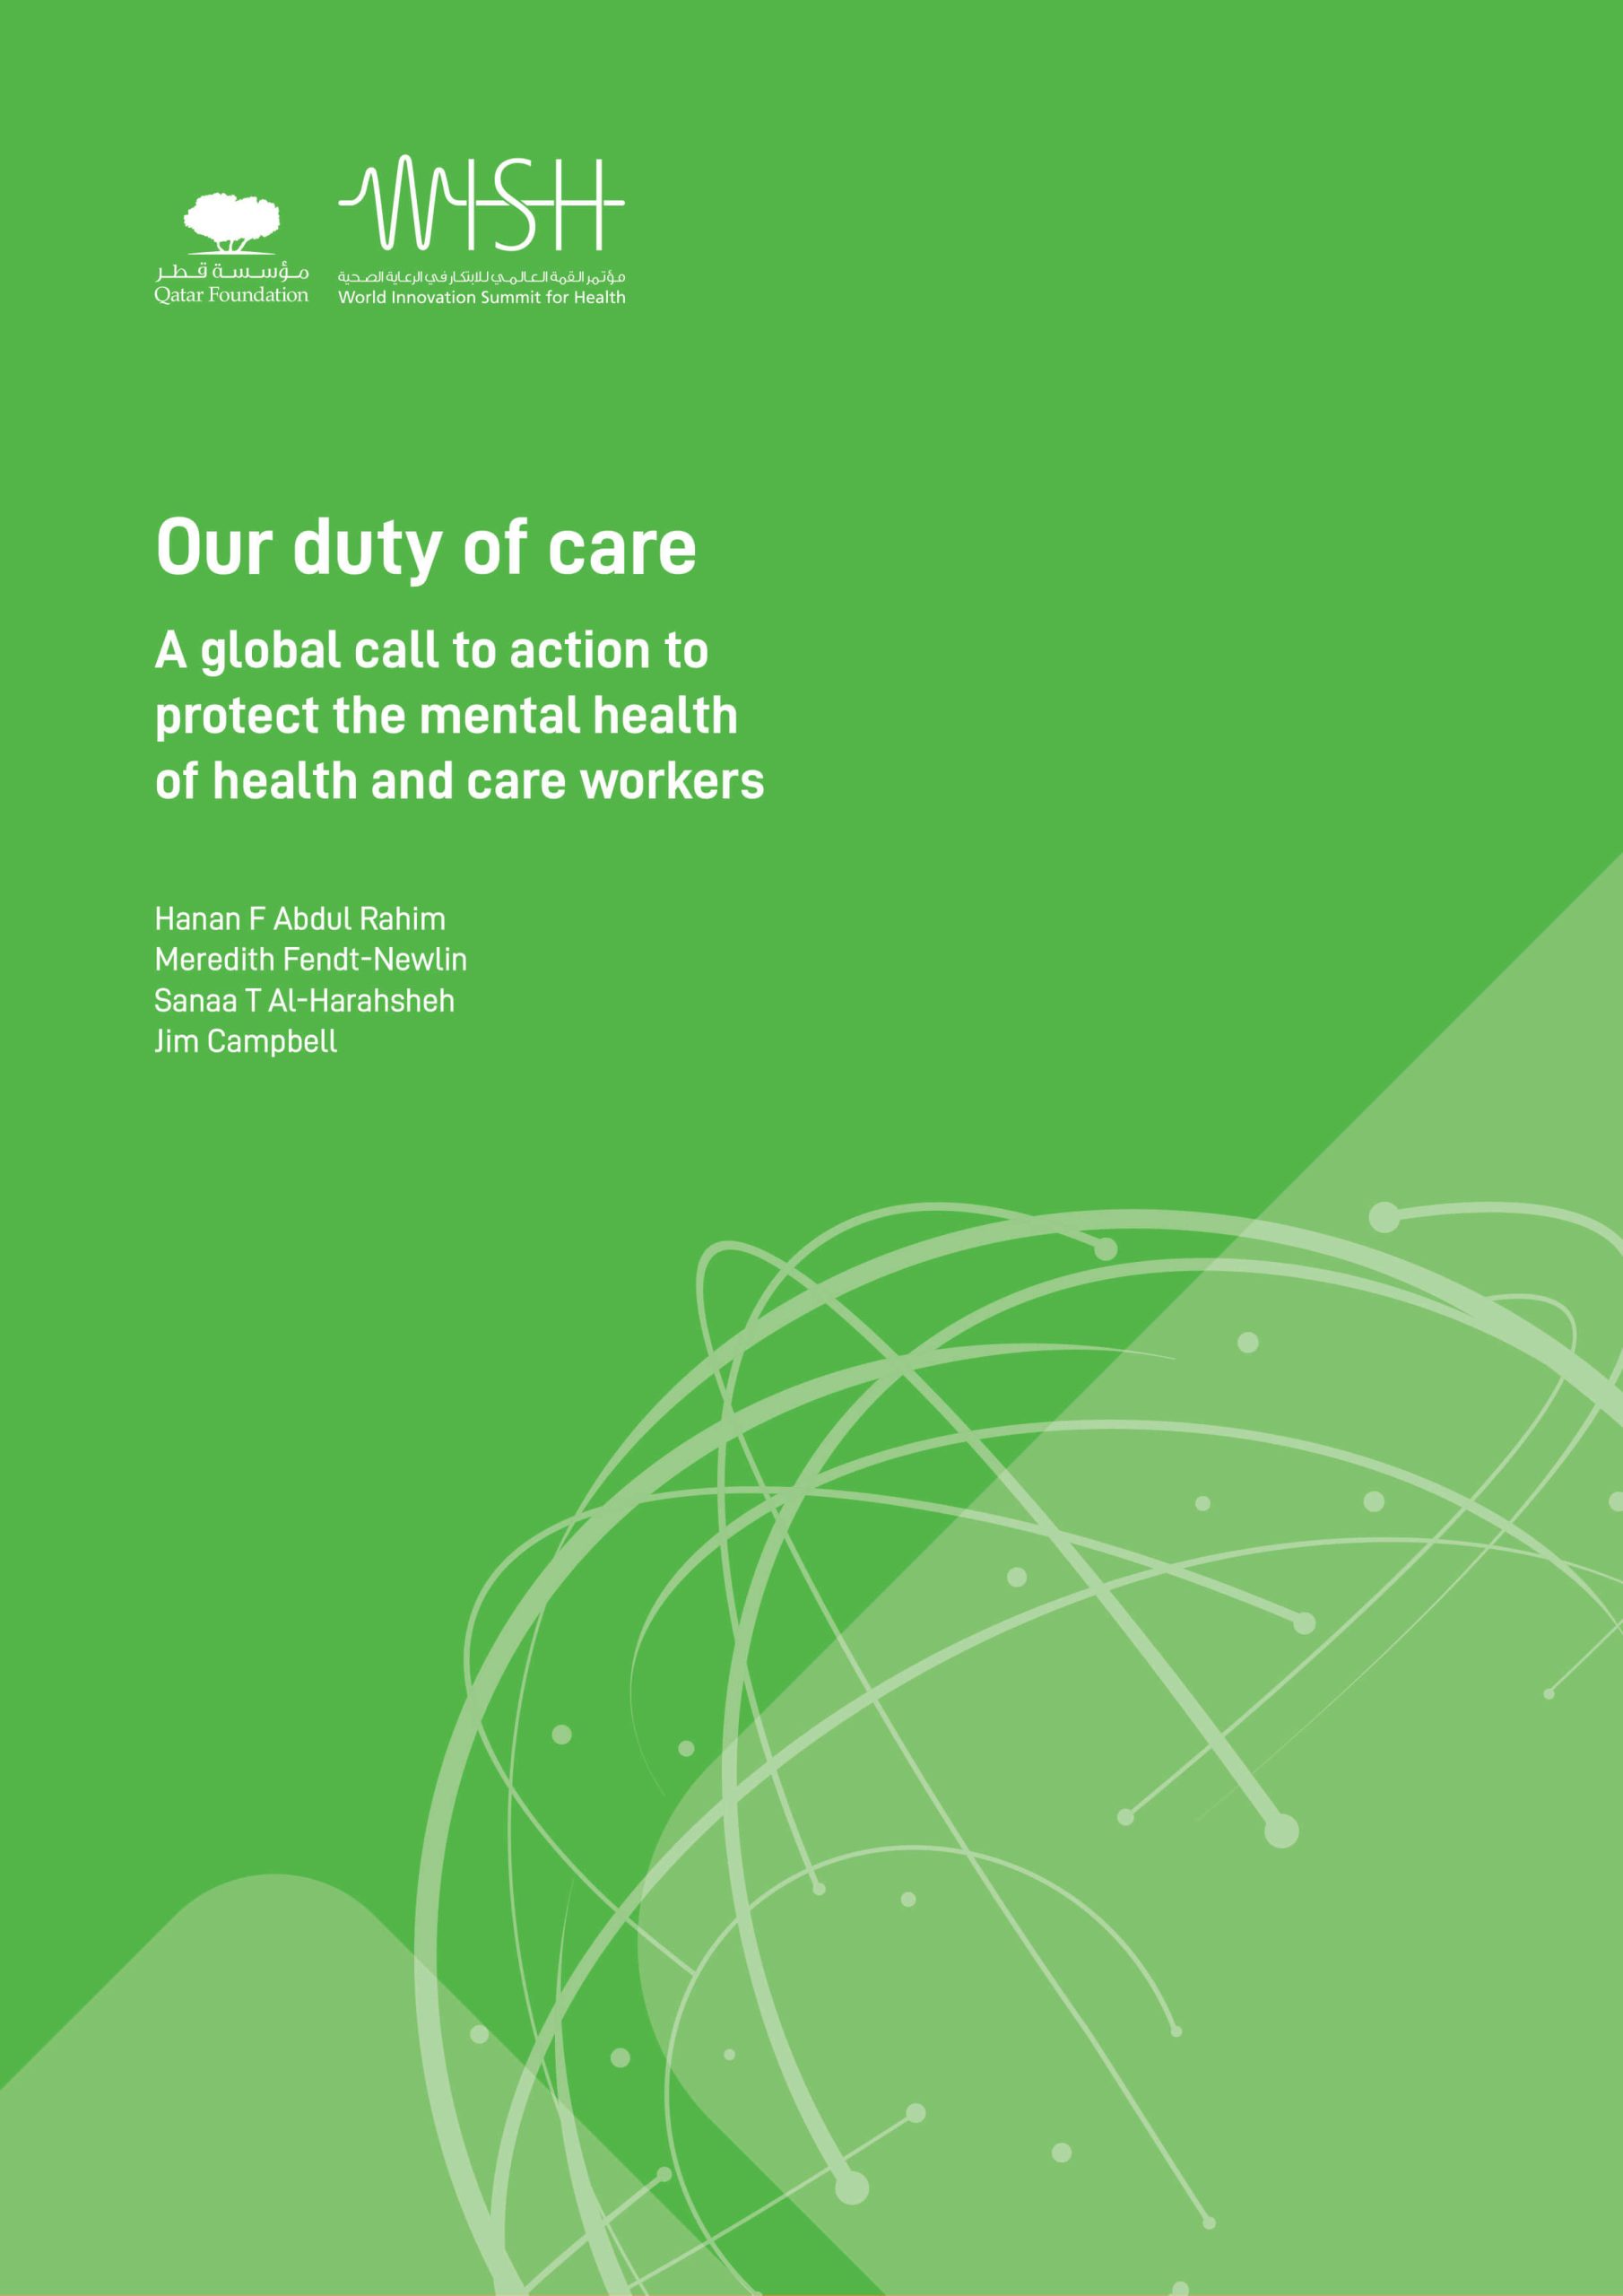 A global call to action to protect the mental health of health and care workers